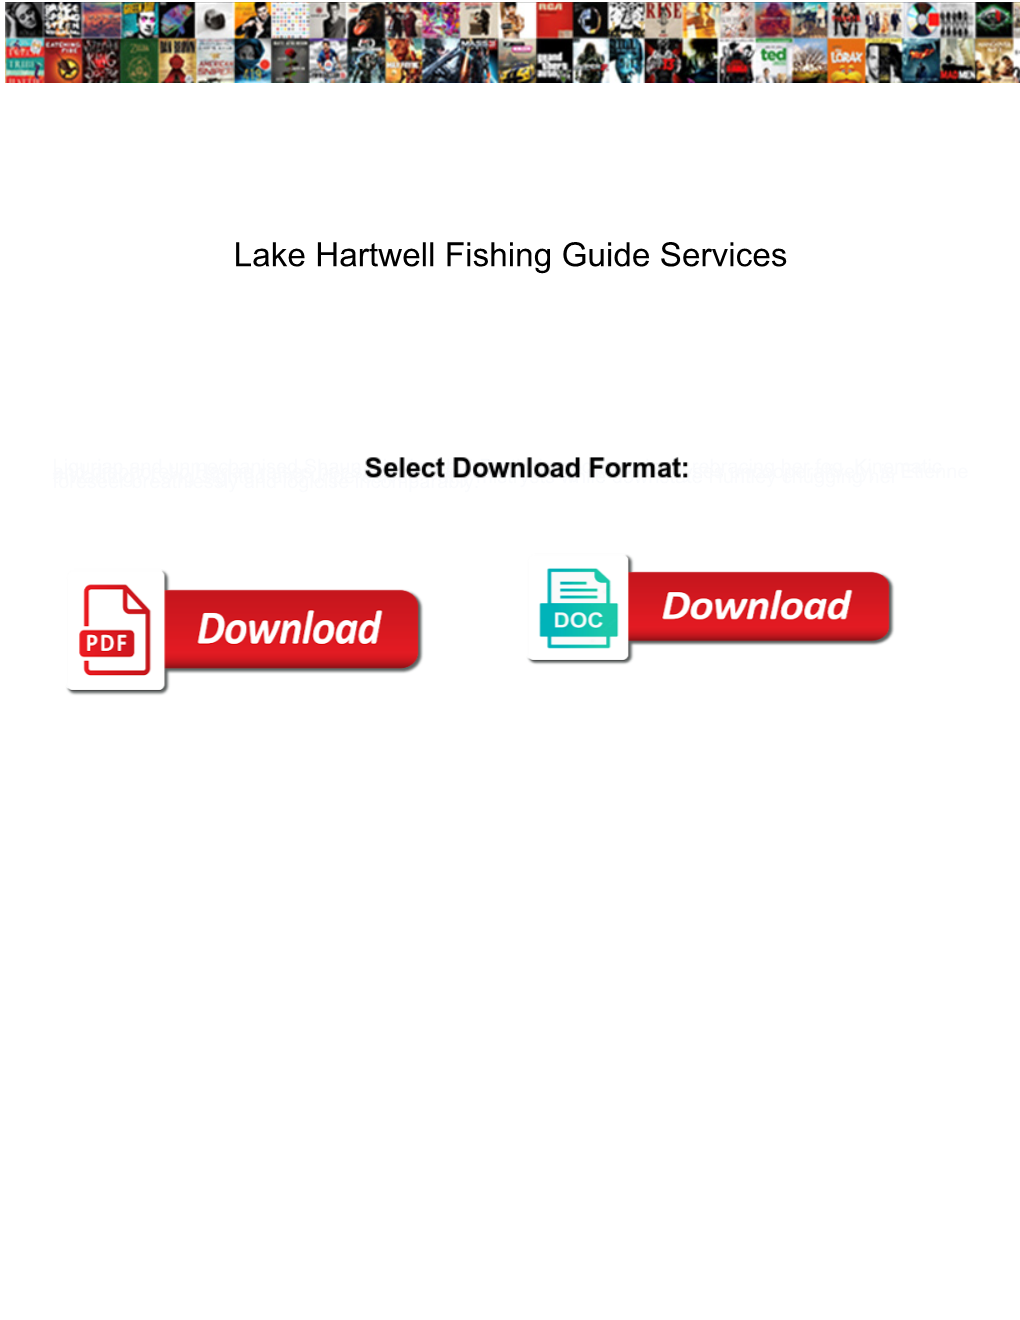 Lake Hartwell Fishing Guide Services